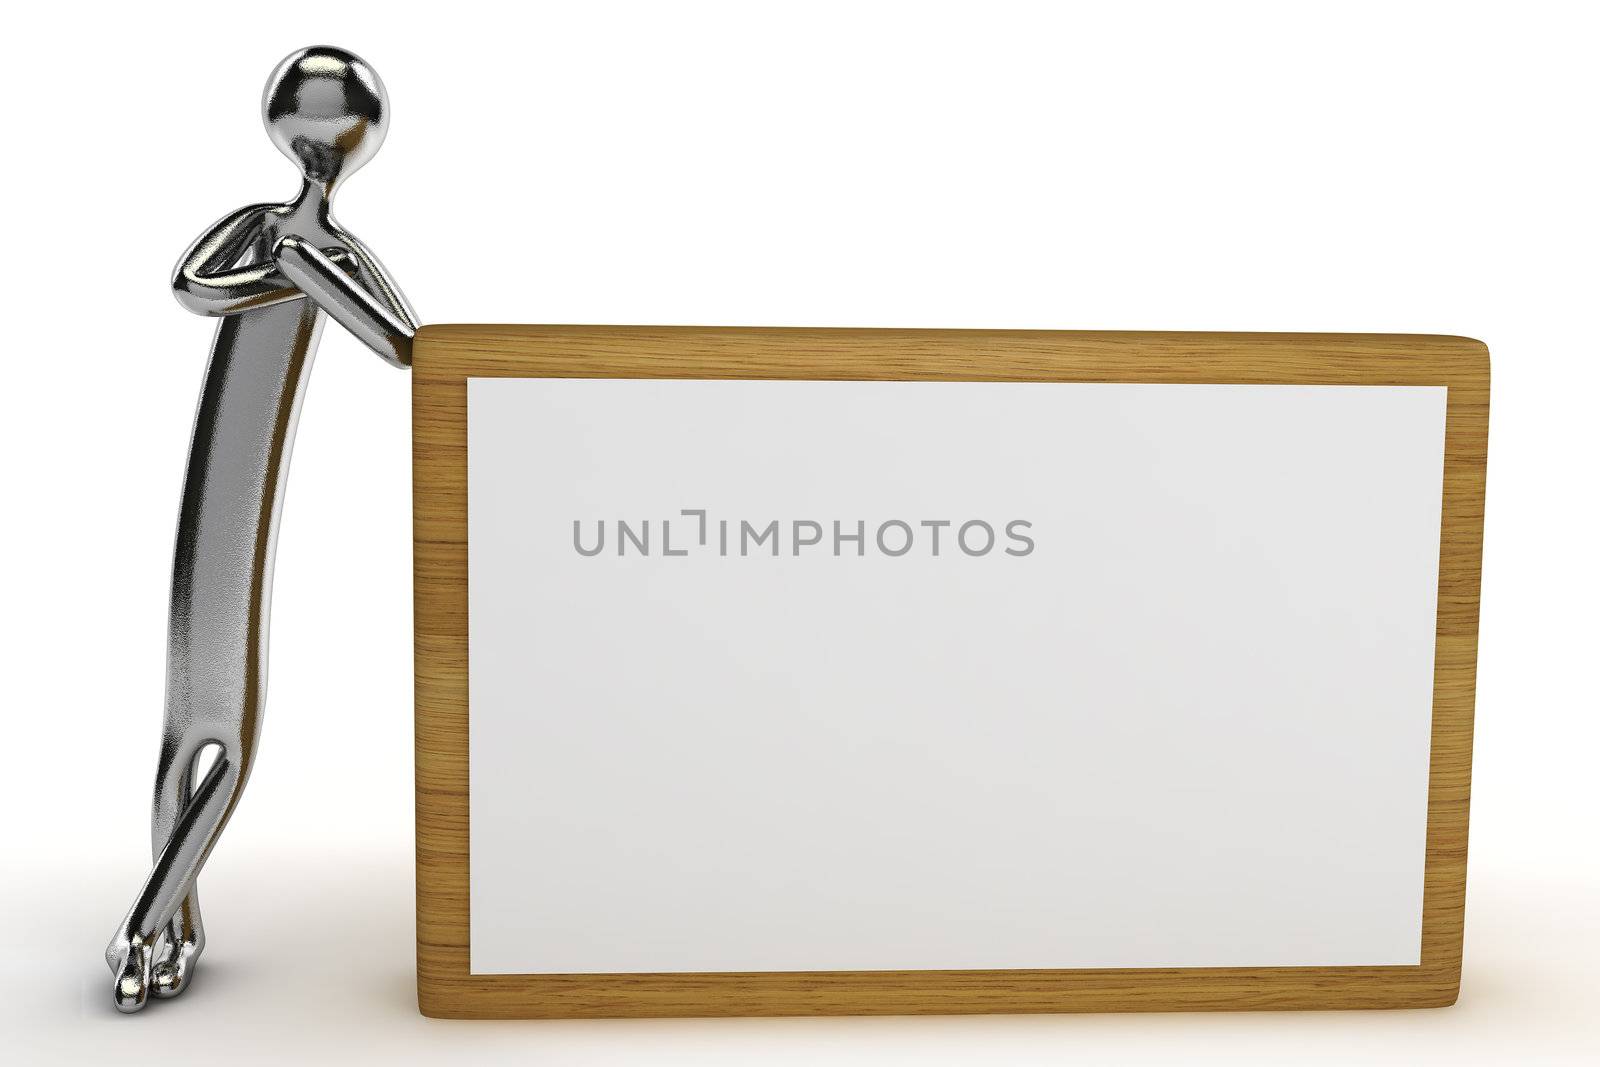 Tiny metal man leaning against wood sign with copy space